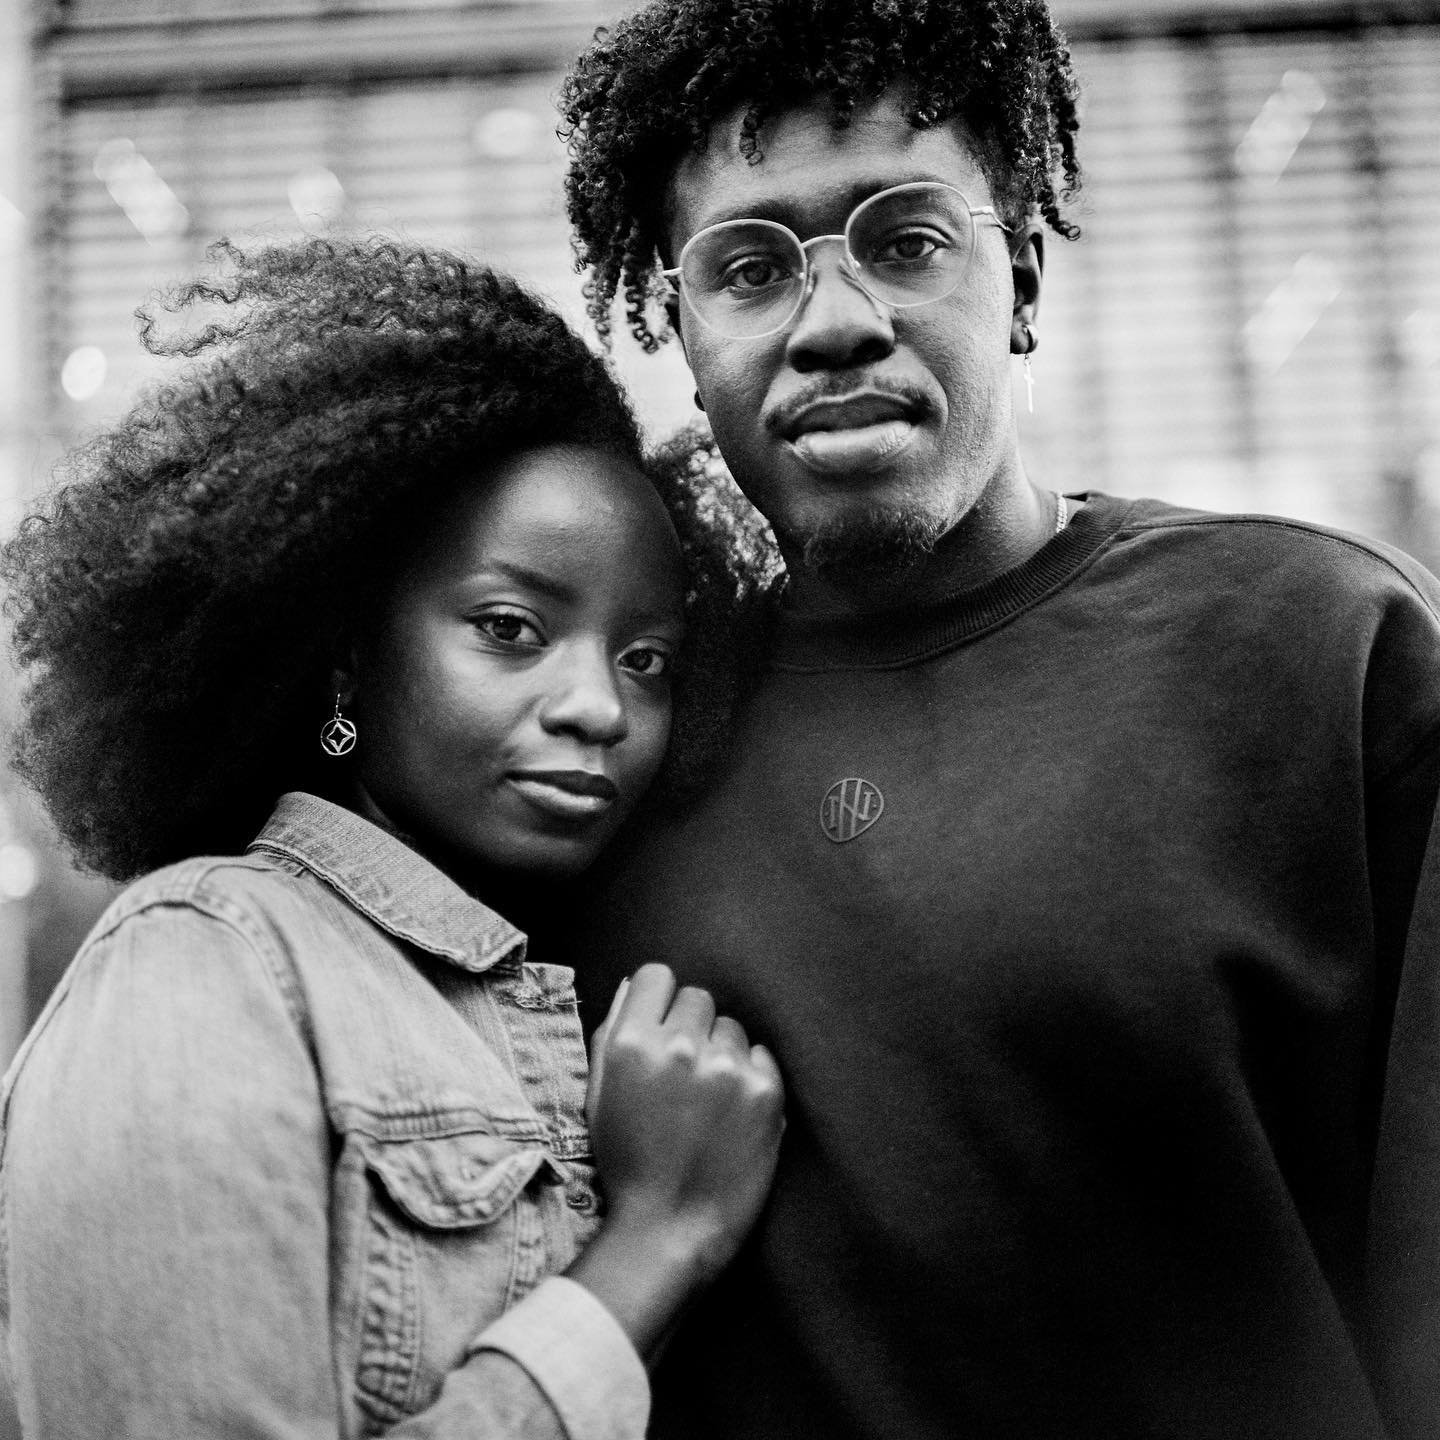 All of Atlanta was out on a walk on the beltline and I was lucky enough to get some amazing people in front of my camera. 

Had an amazing time with @kehcamera @beersandcameras and @thedarkroomlab at #filmstock2023 shot on my #rolleiflex2.8f and #ilf